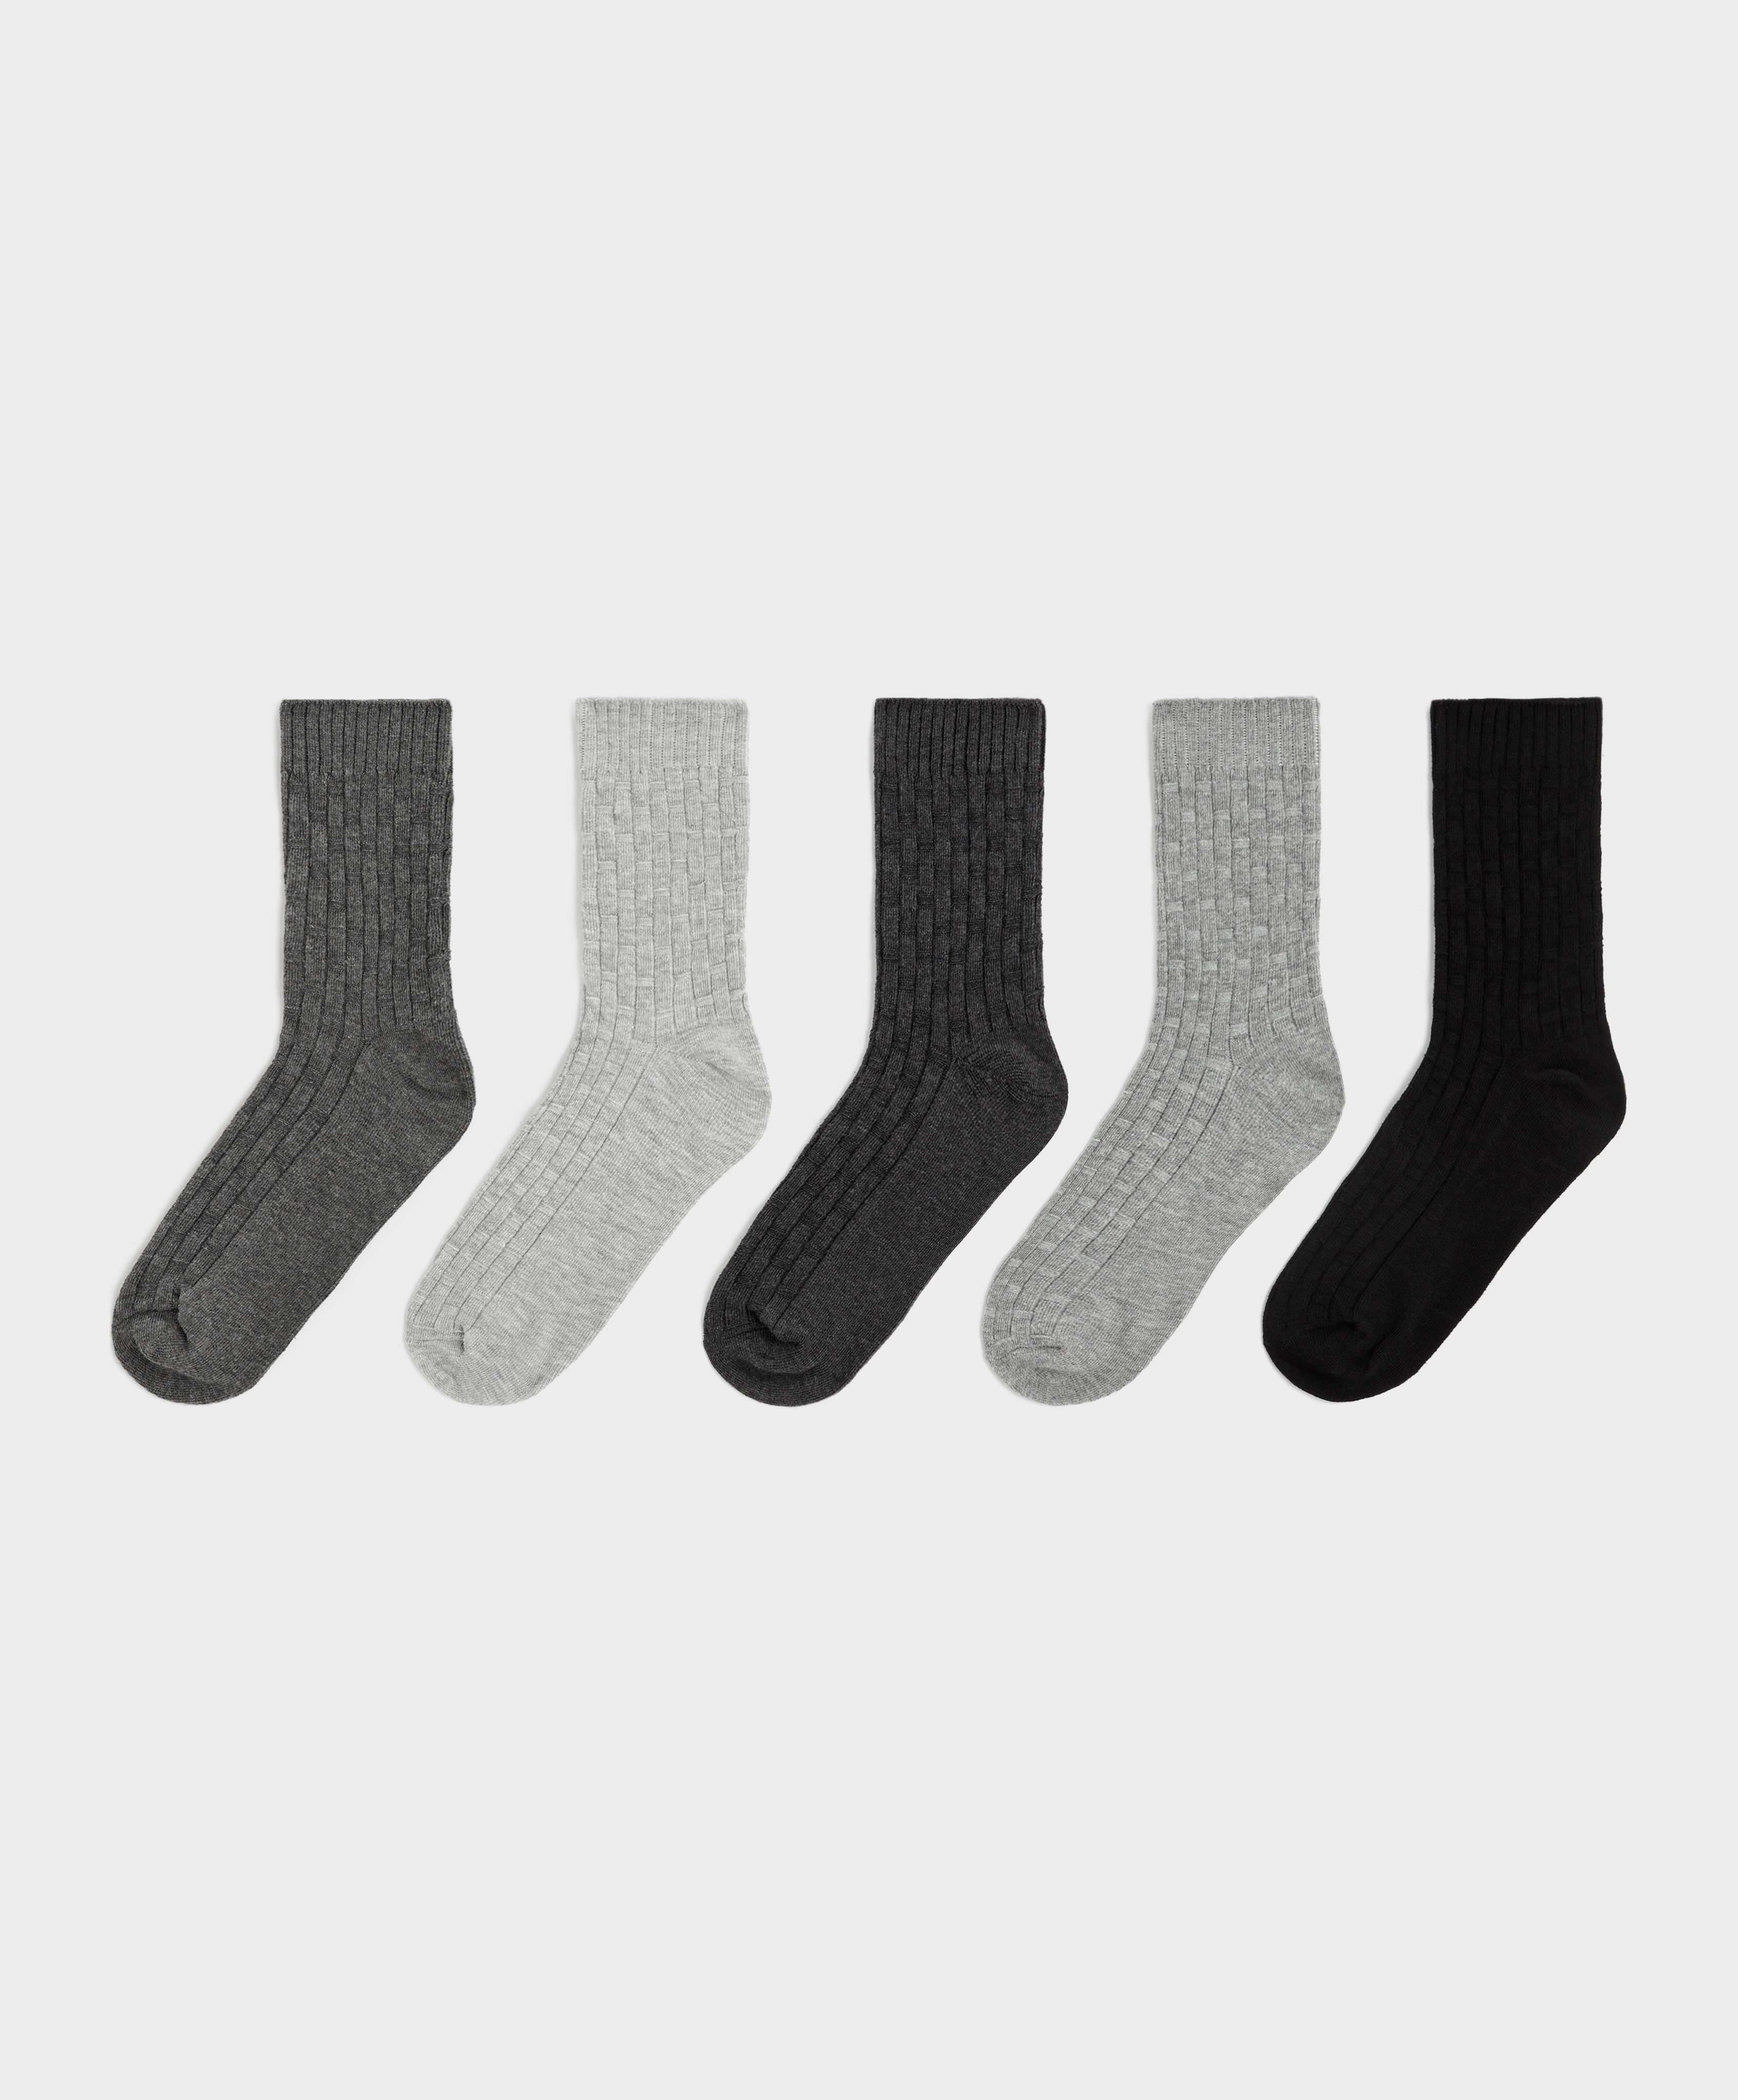 5 pairs of textured cotton classic socks